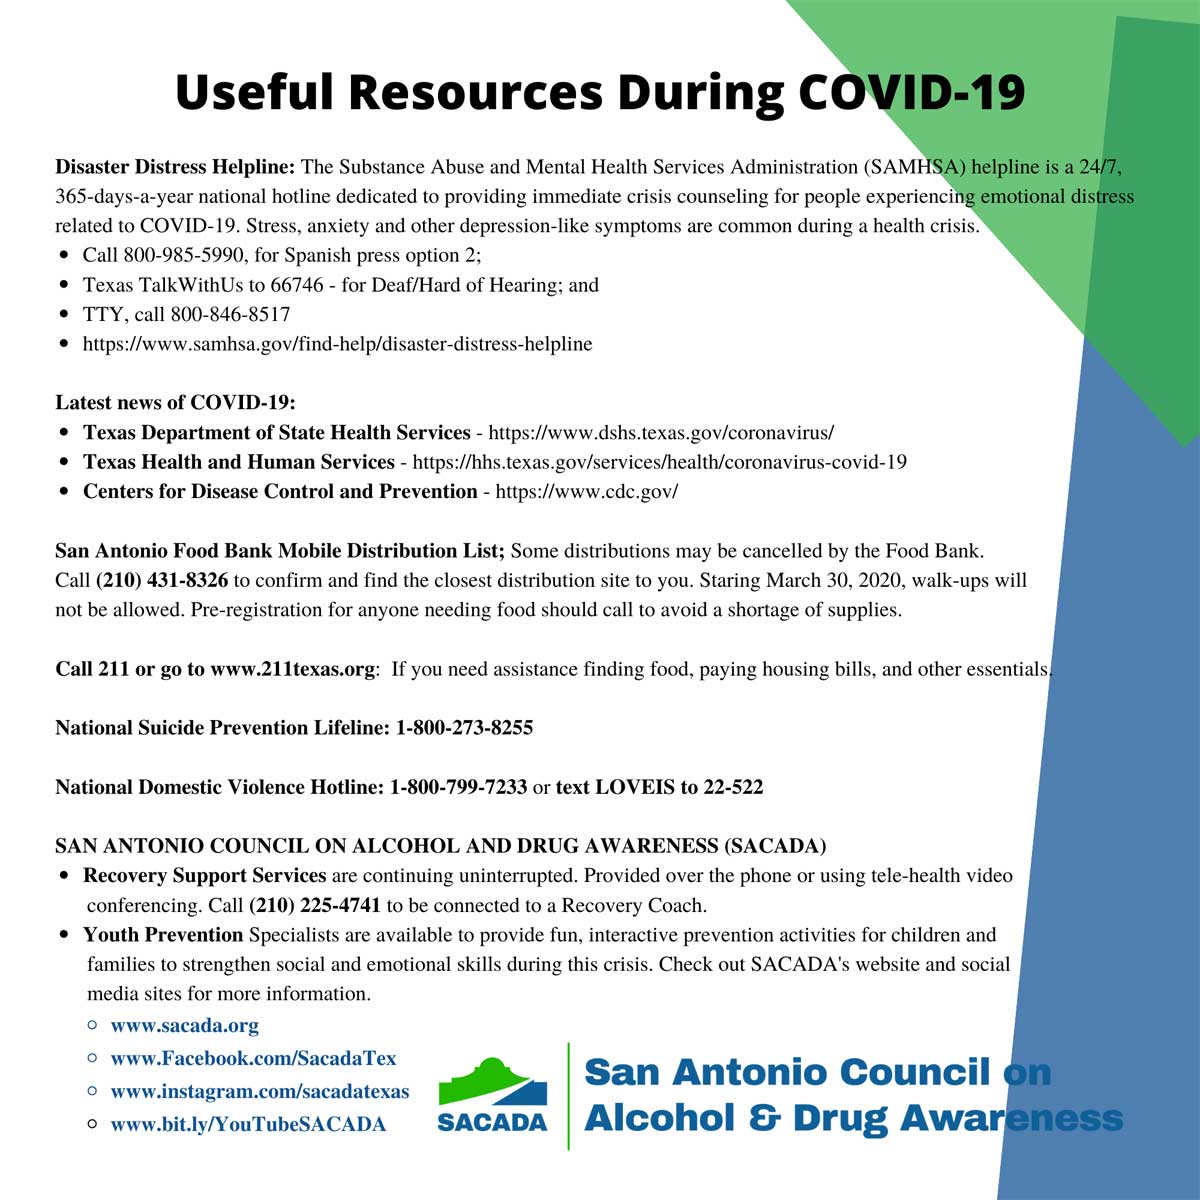 Useful Resources During COVID-19